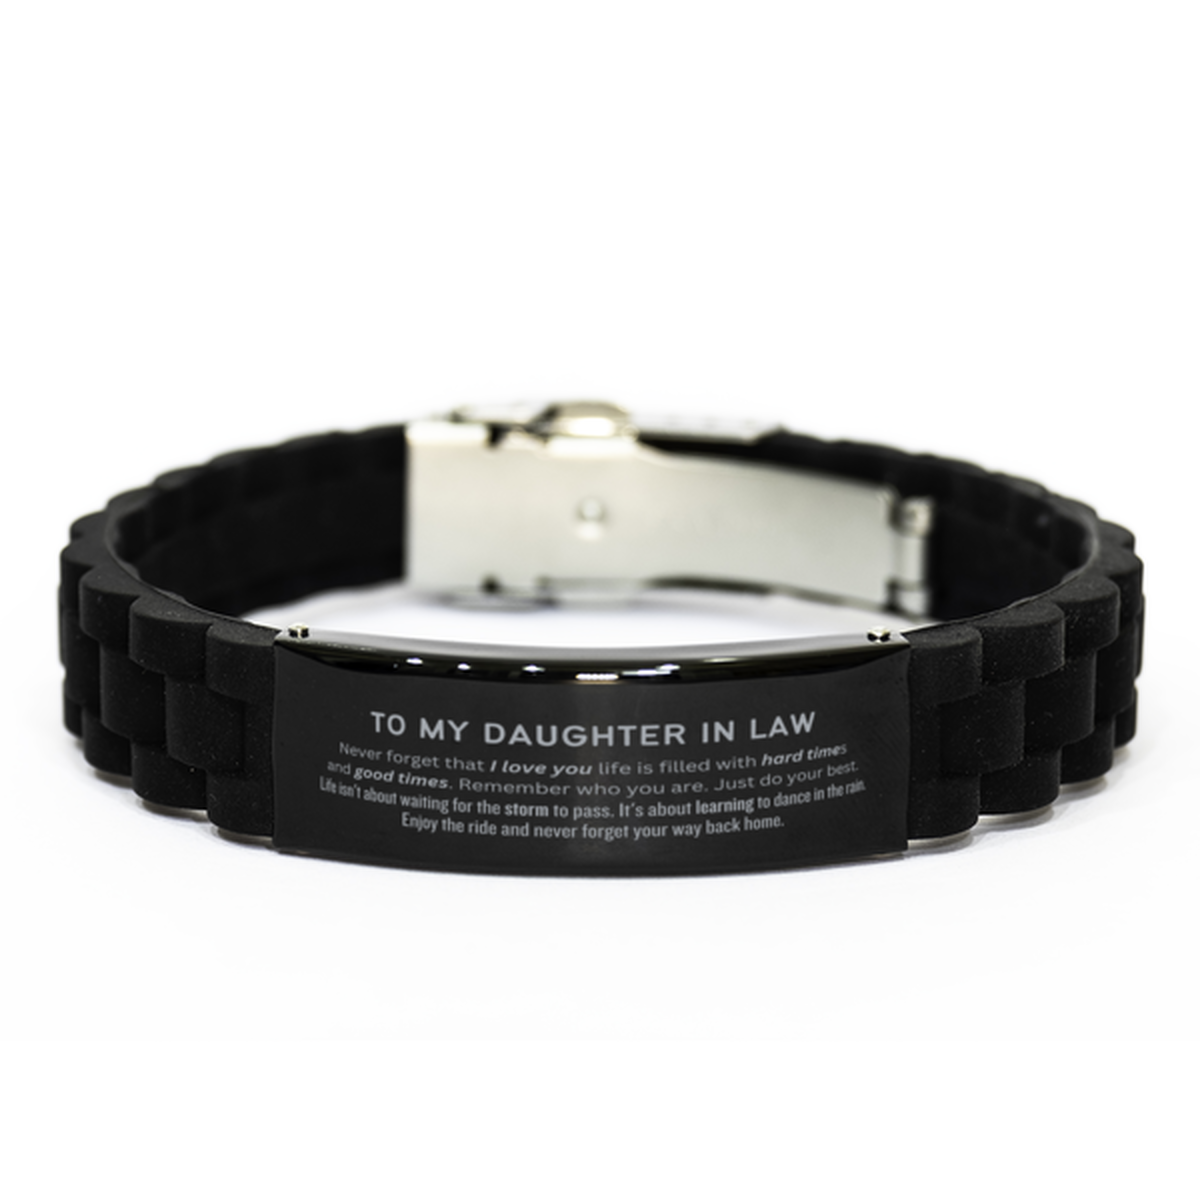 Christmas Daughter In Law Black Glidelock Clasp Bracelet Gifts, To My Daughter In Law Birthday Thank You Gifts For Daughter In Law, Graduation Unique Gifts For Daughter In Law To My Daughter In Law Never forget that I love you life is filled with hard tim